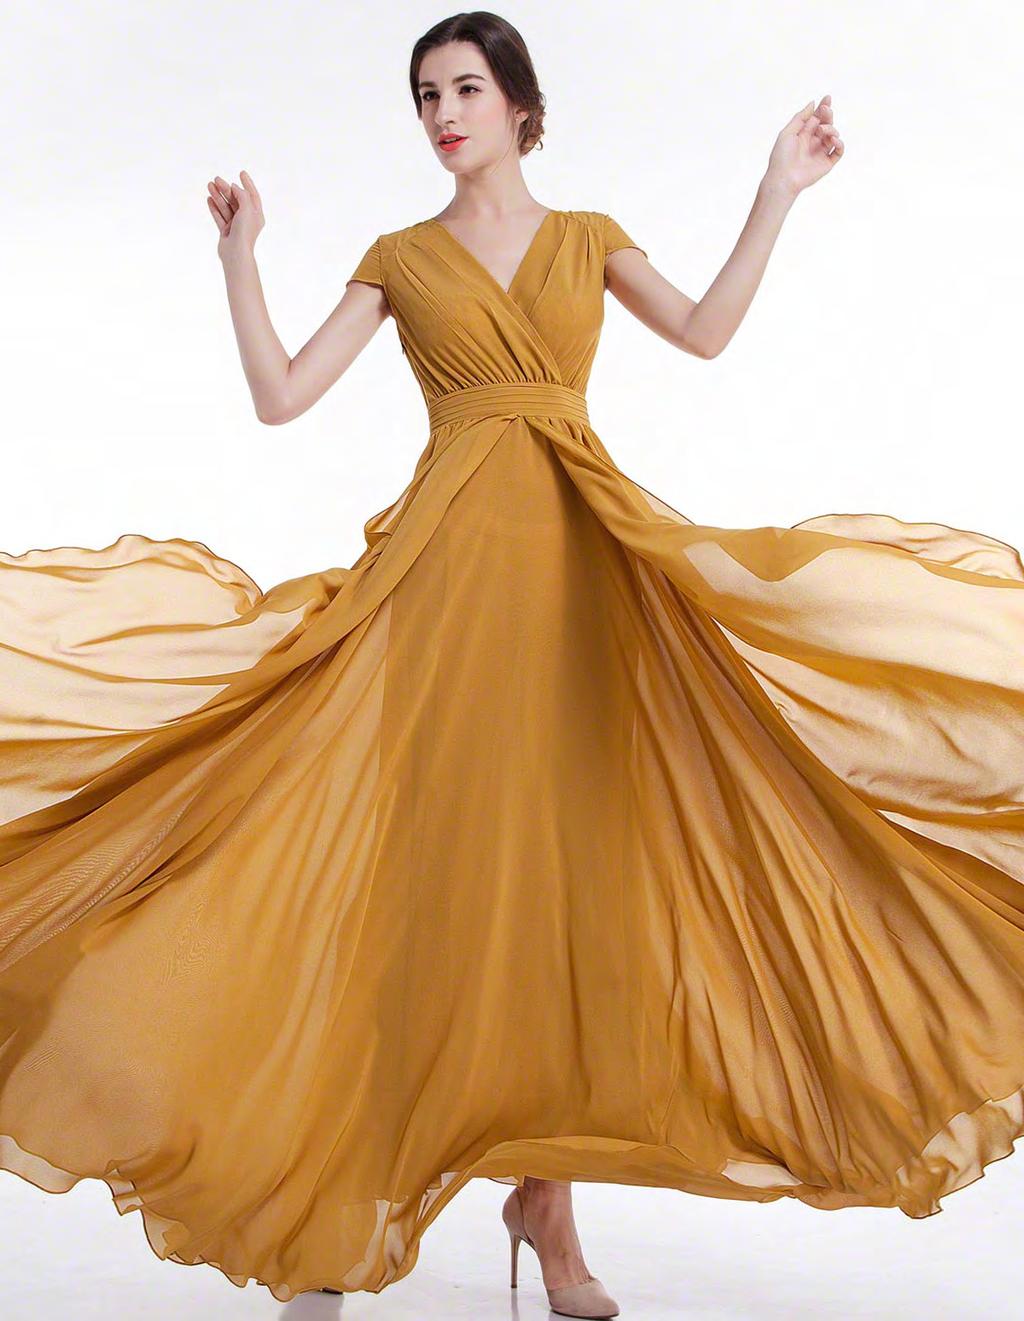 We ve come to rely on the chic black dress as a go-to for elegant events, but for those that like to show off their colorful personality, this bold, beautiful mustard yellow elegant evening gown is